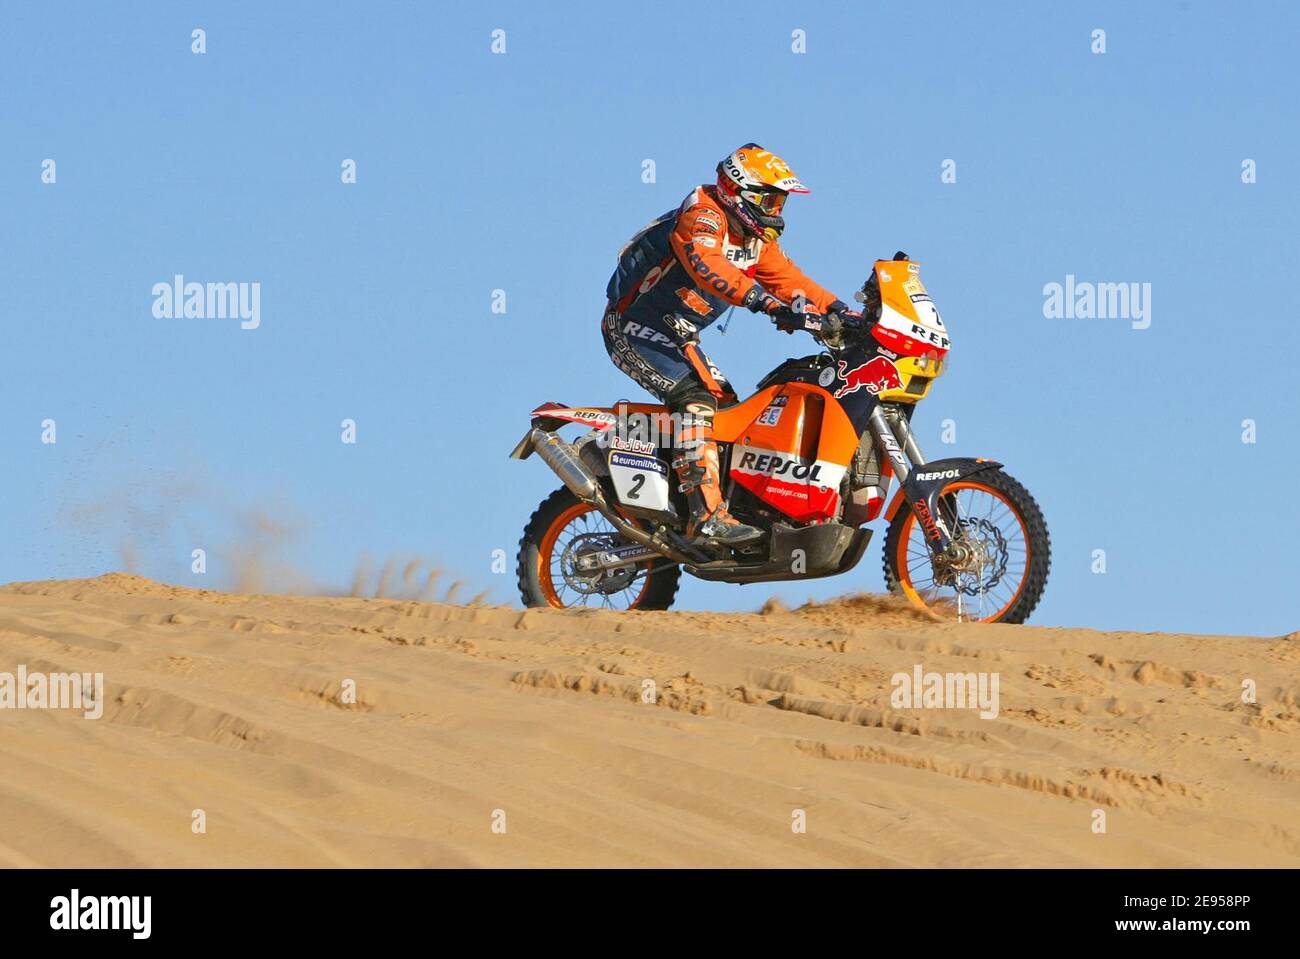 Spanish bike rider Marc Coma rides his KTM (002) through the 7nd stage of  the 2006 Lisbon-Dakar rally between Zouerat and Atar, Mauritania on January  6, 2006. The 28th Dakar Rally started